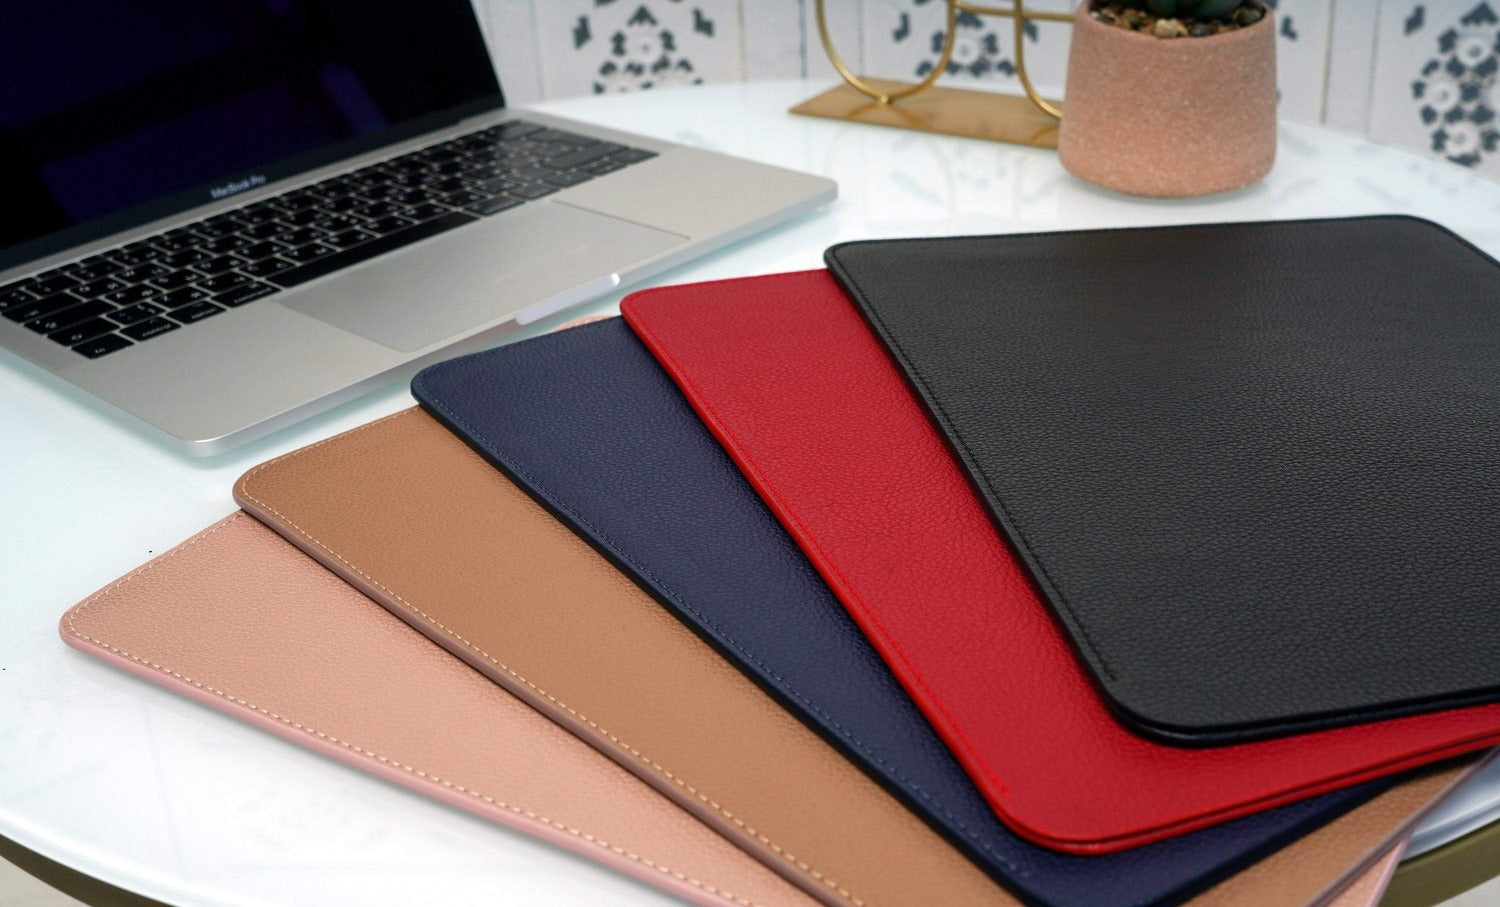 Leather Laptop Sleeve, MacBook Pro 13 inch Air Protective Cover